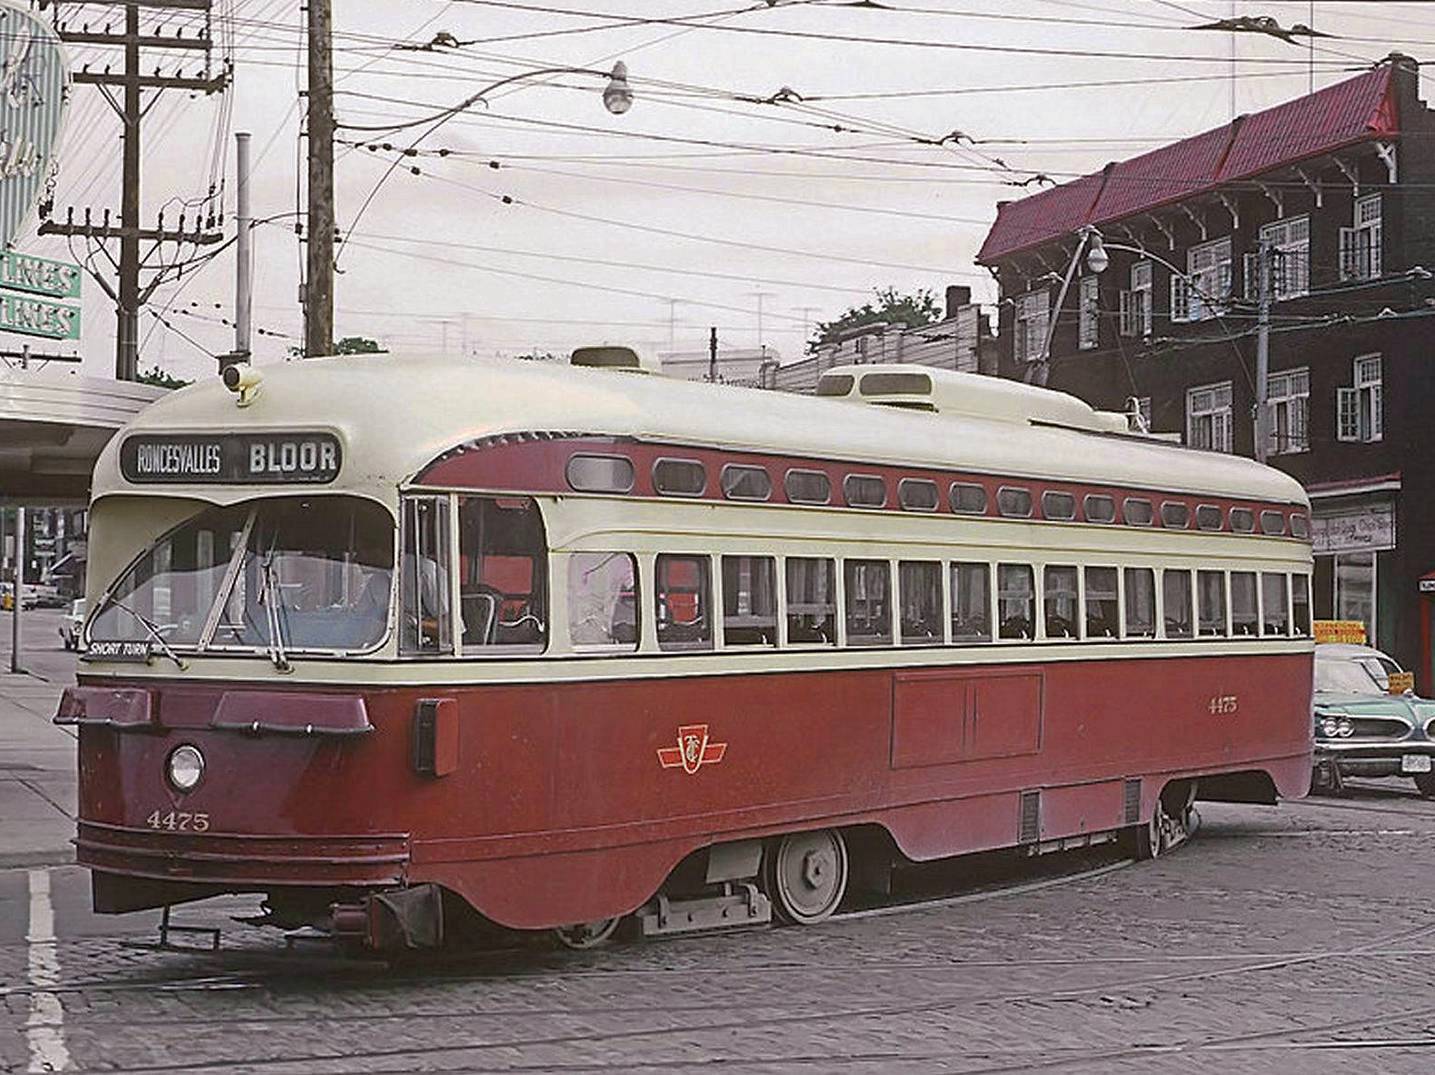 PHOTO - TORONTO - RONCESVALLES AND QUEEN - TTC PCC STREETCAR TURNING W - NOTE MISSING PIECE OF TRIM ABOVE WINDOWS NEAR FRONT OF CAR ROOF - 1966